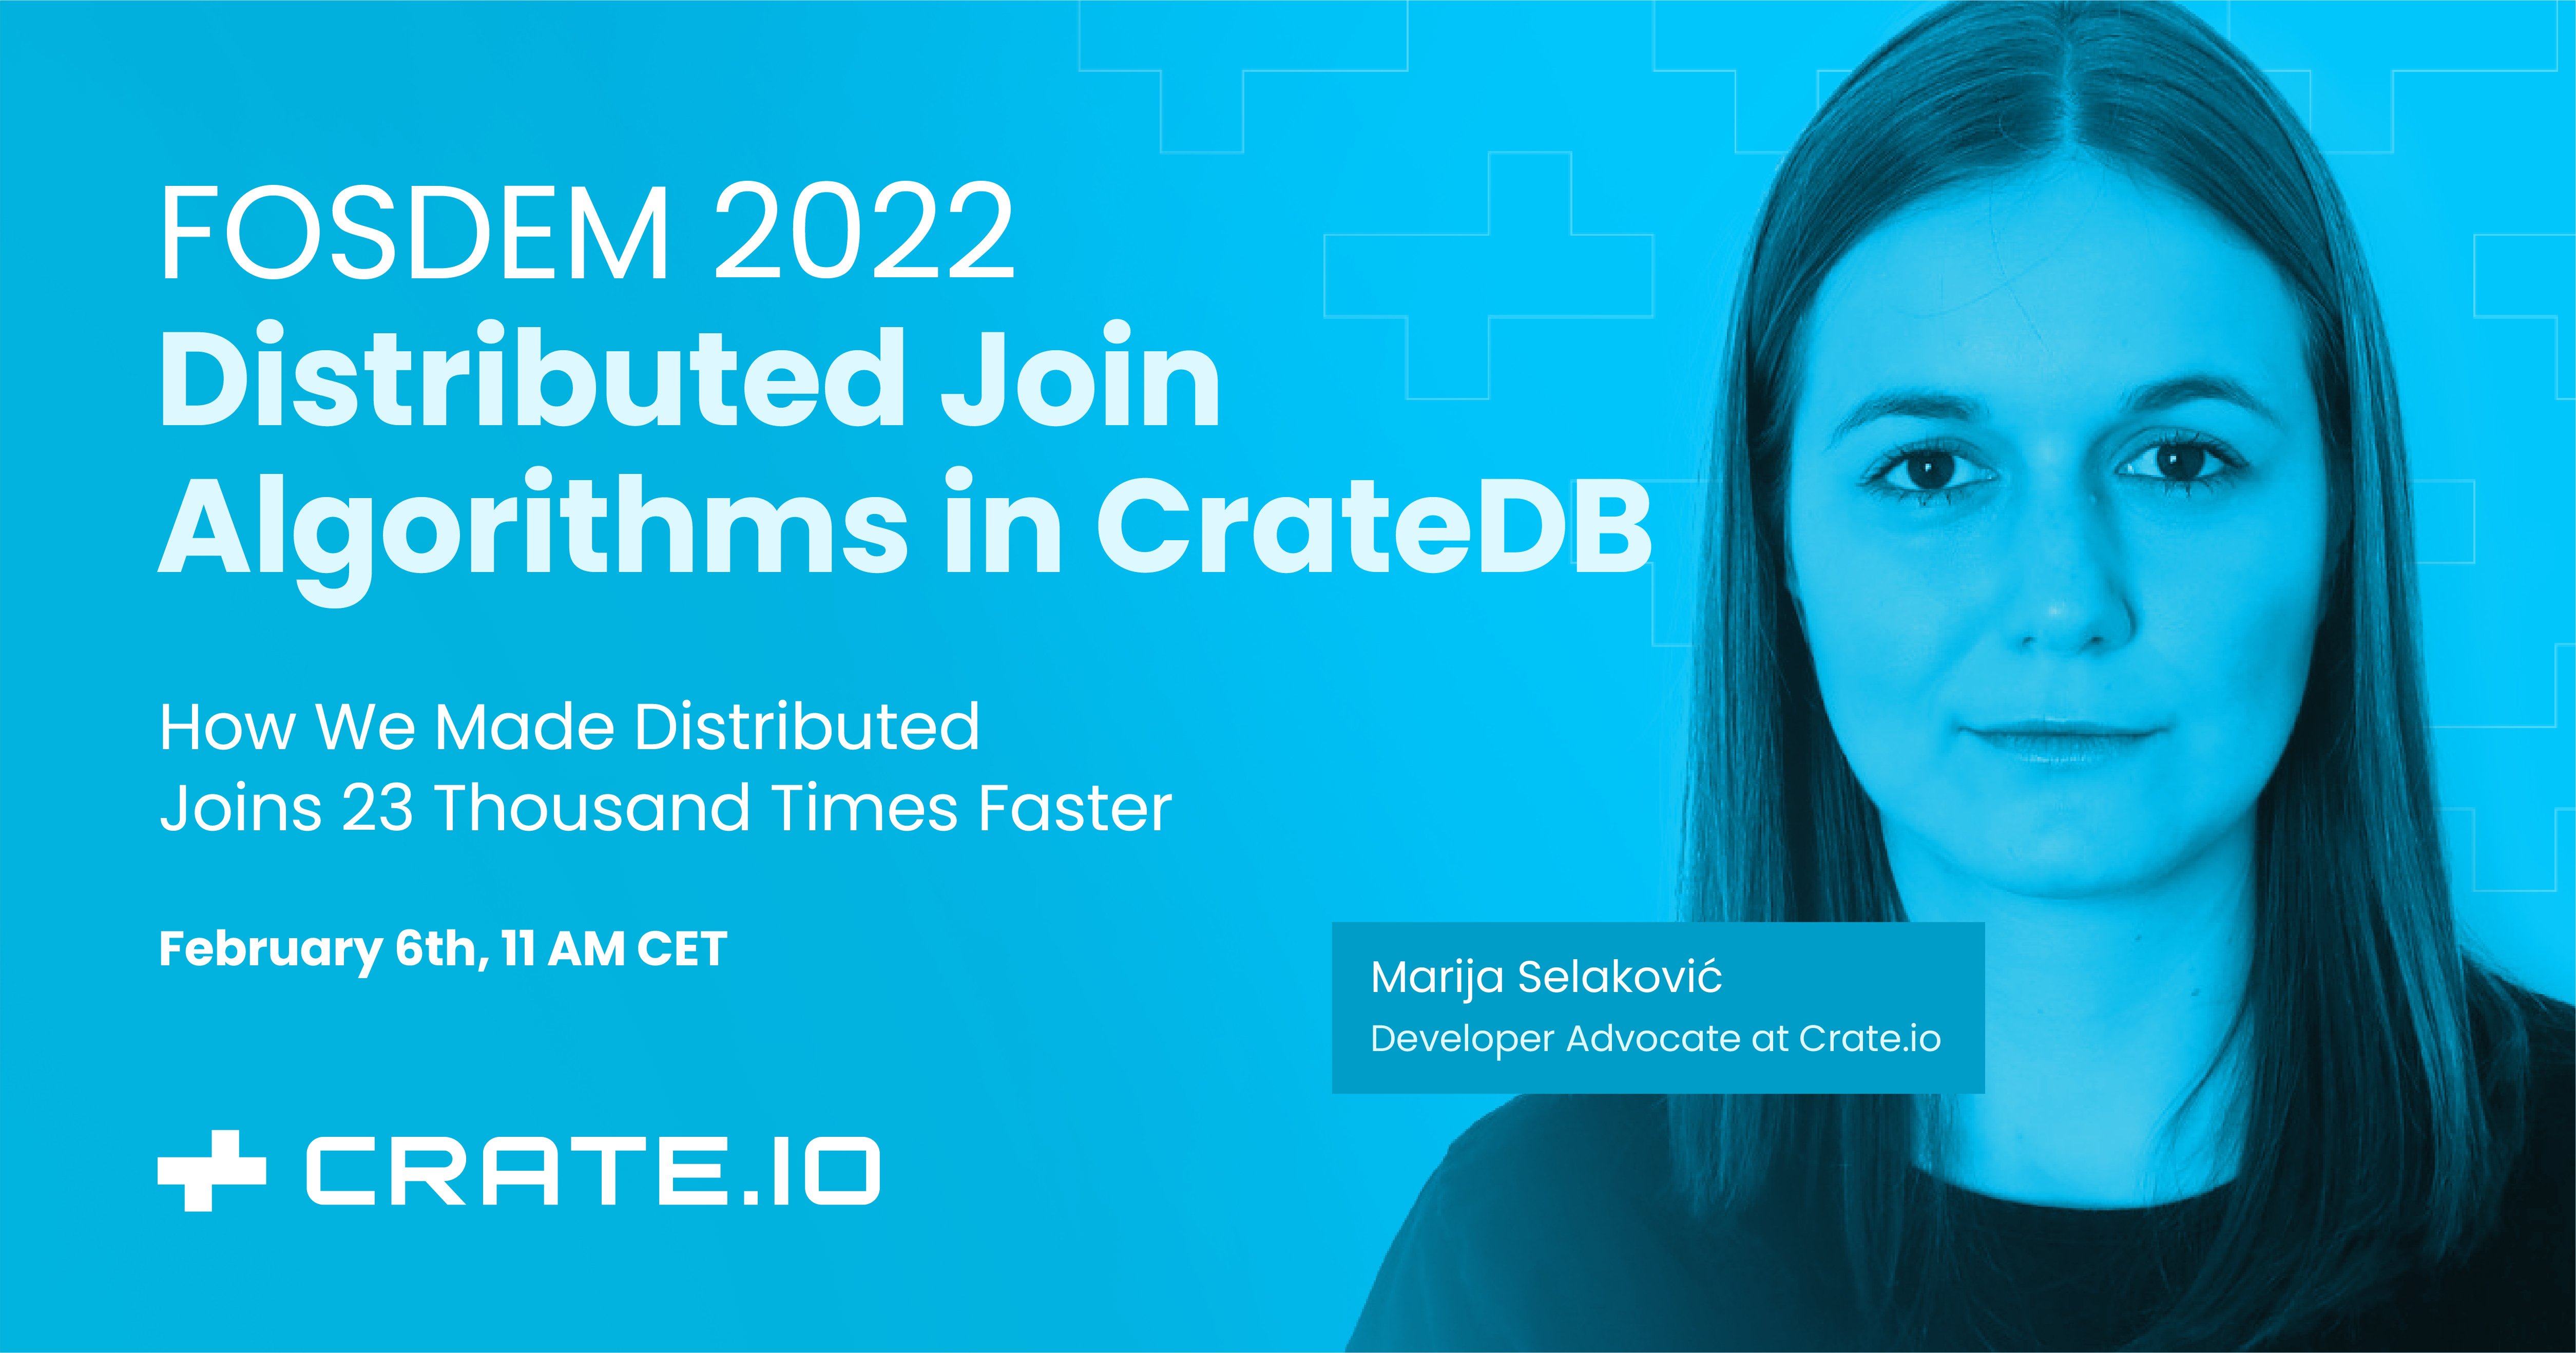 FOSDEM 2022: Distributed Join Algorithms in CrateDB